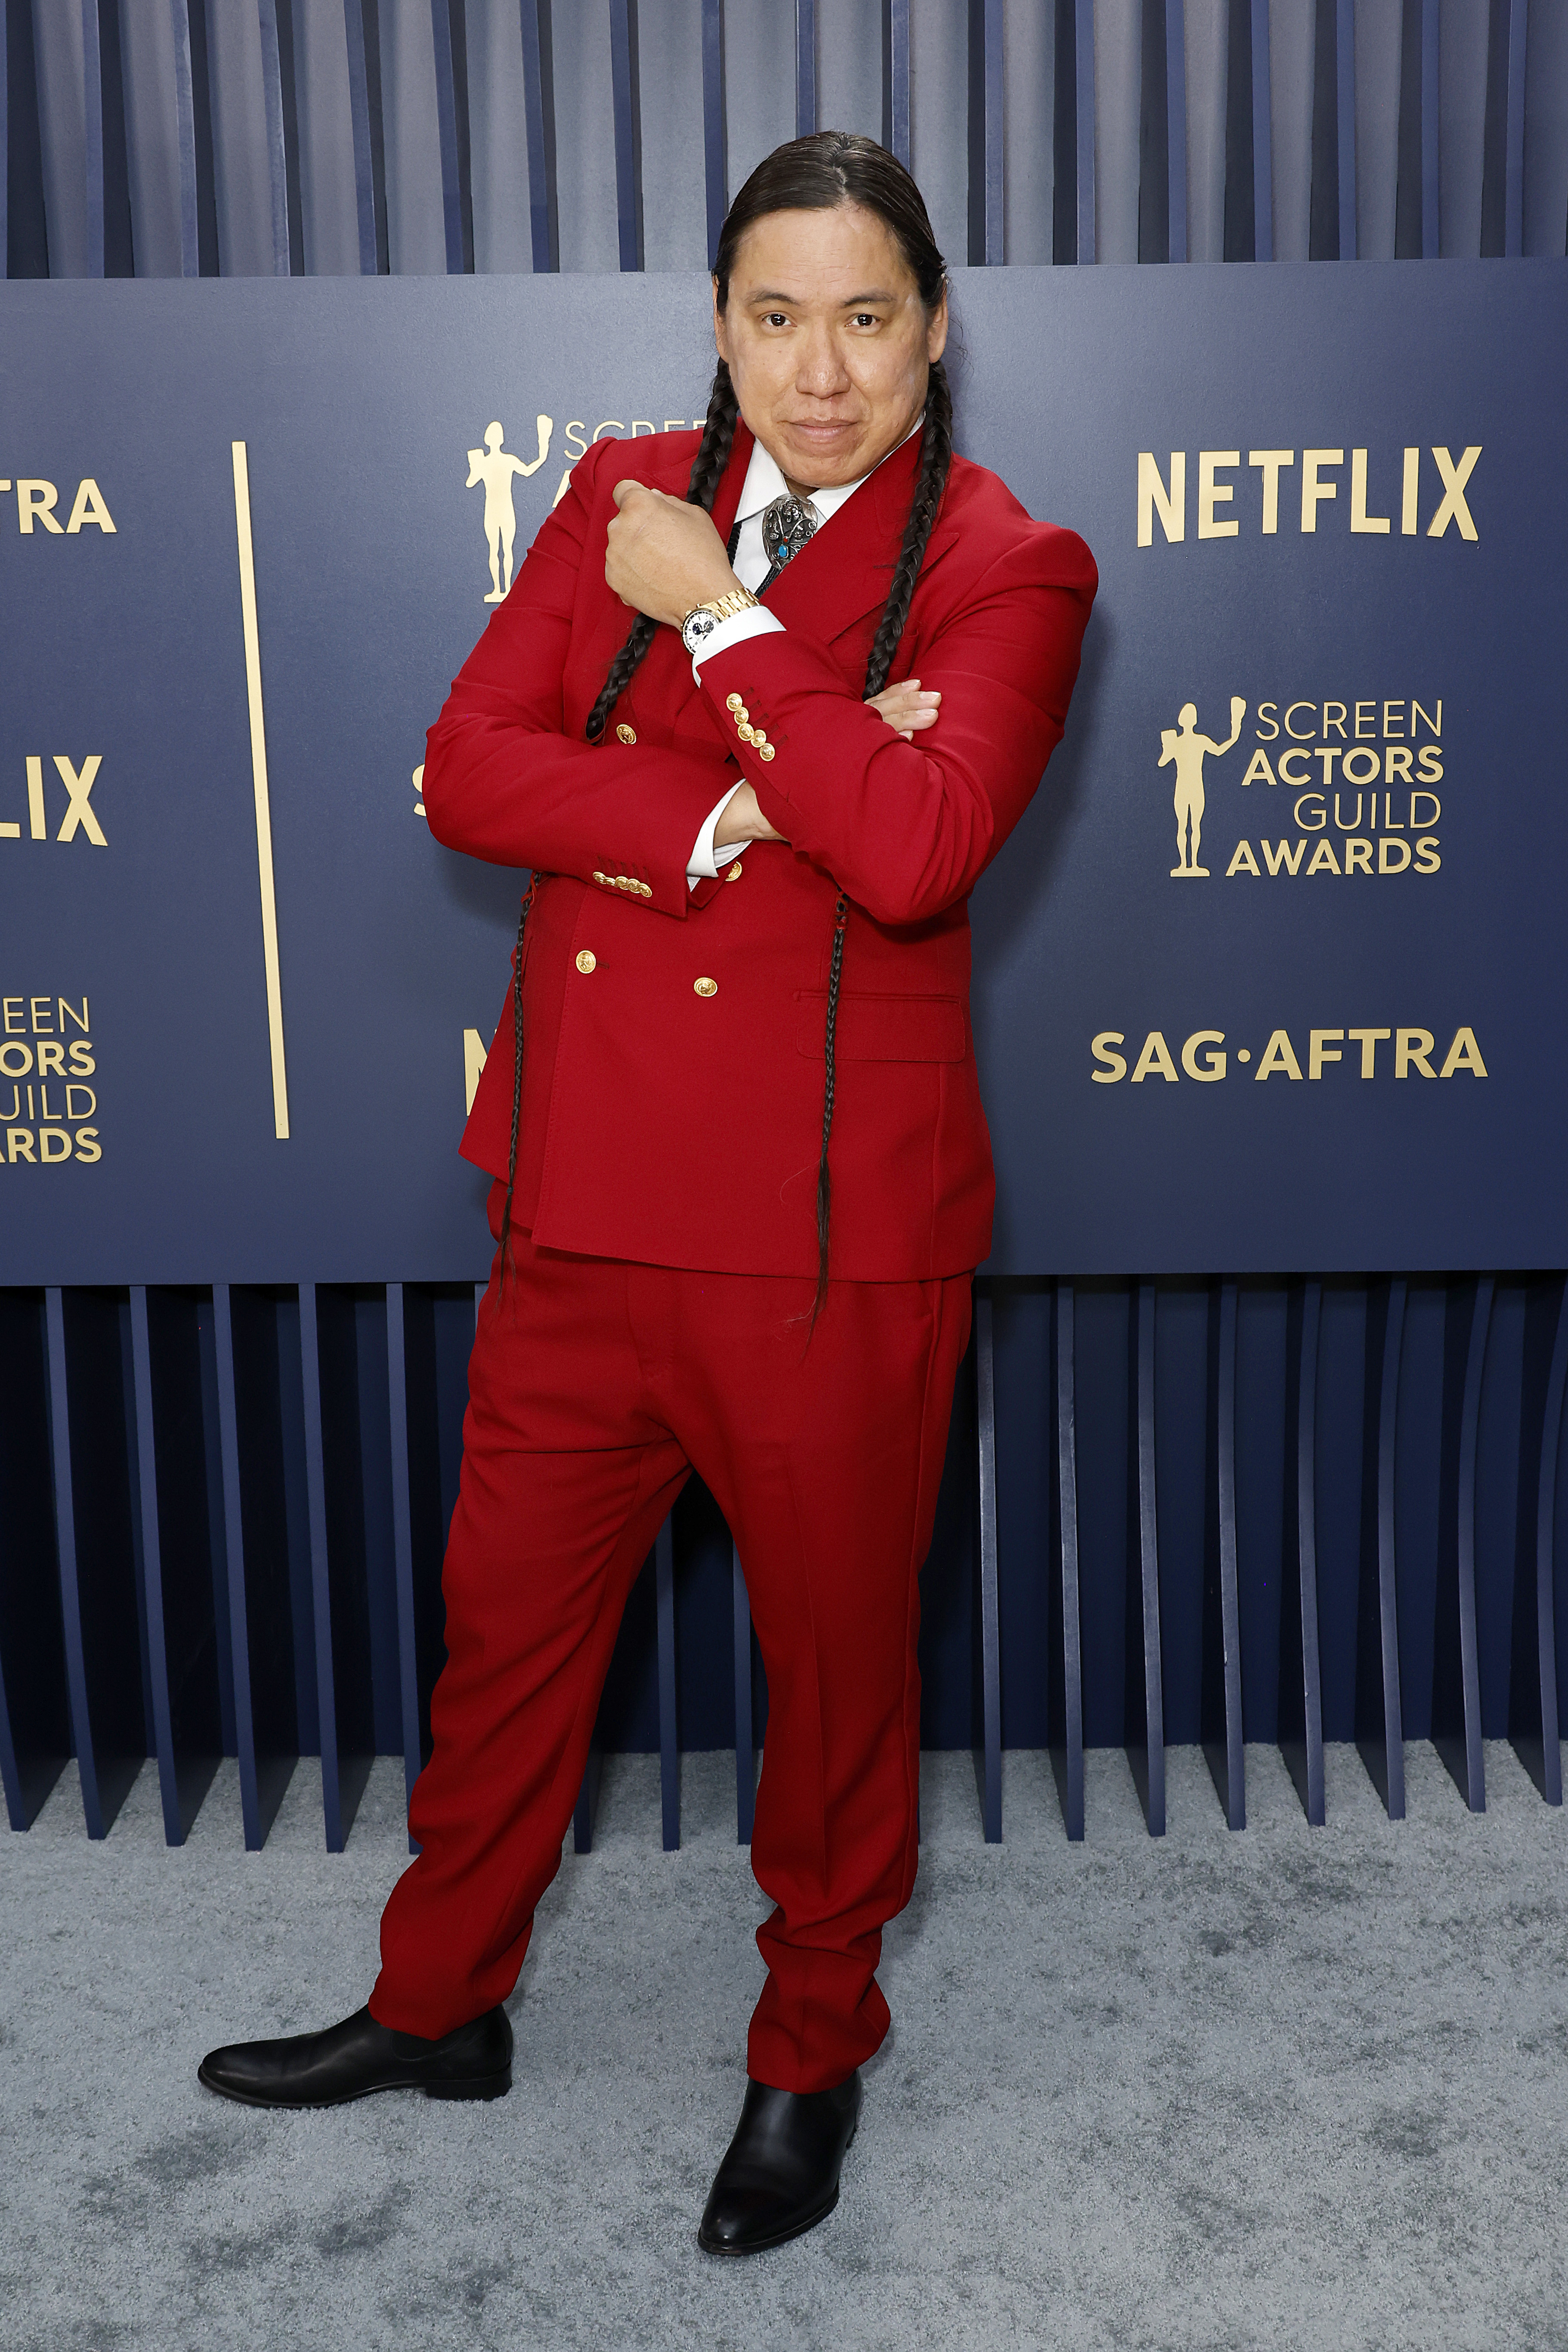 He&#x27;s wearing a red suit with long braided hair